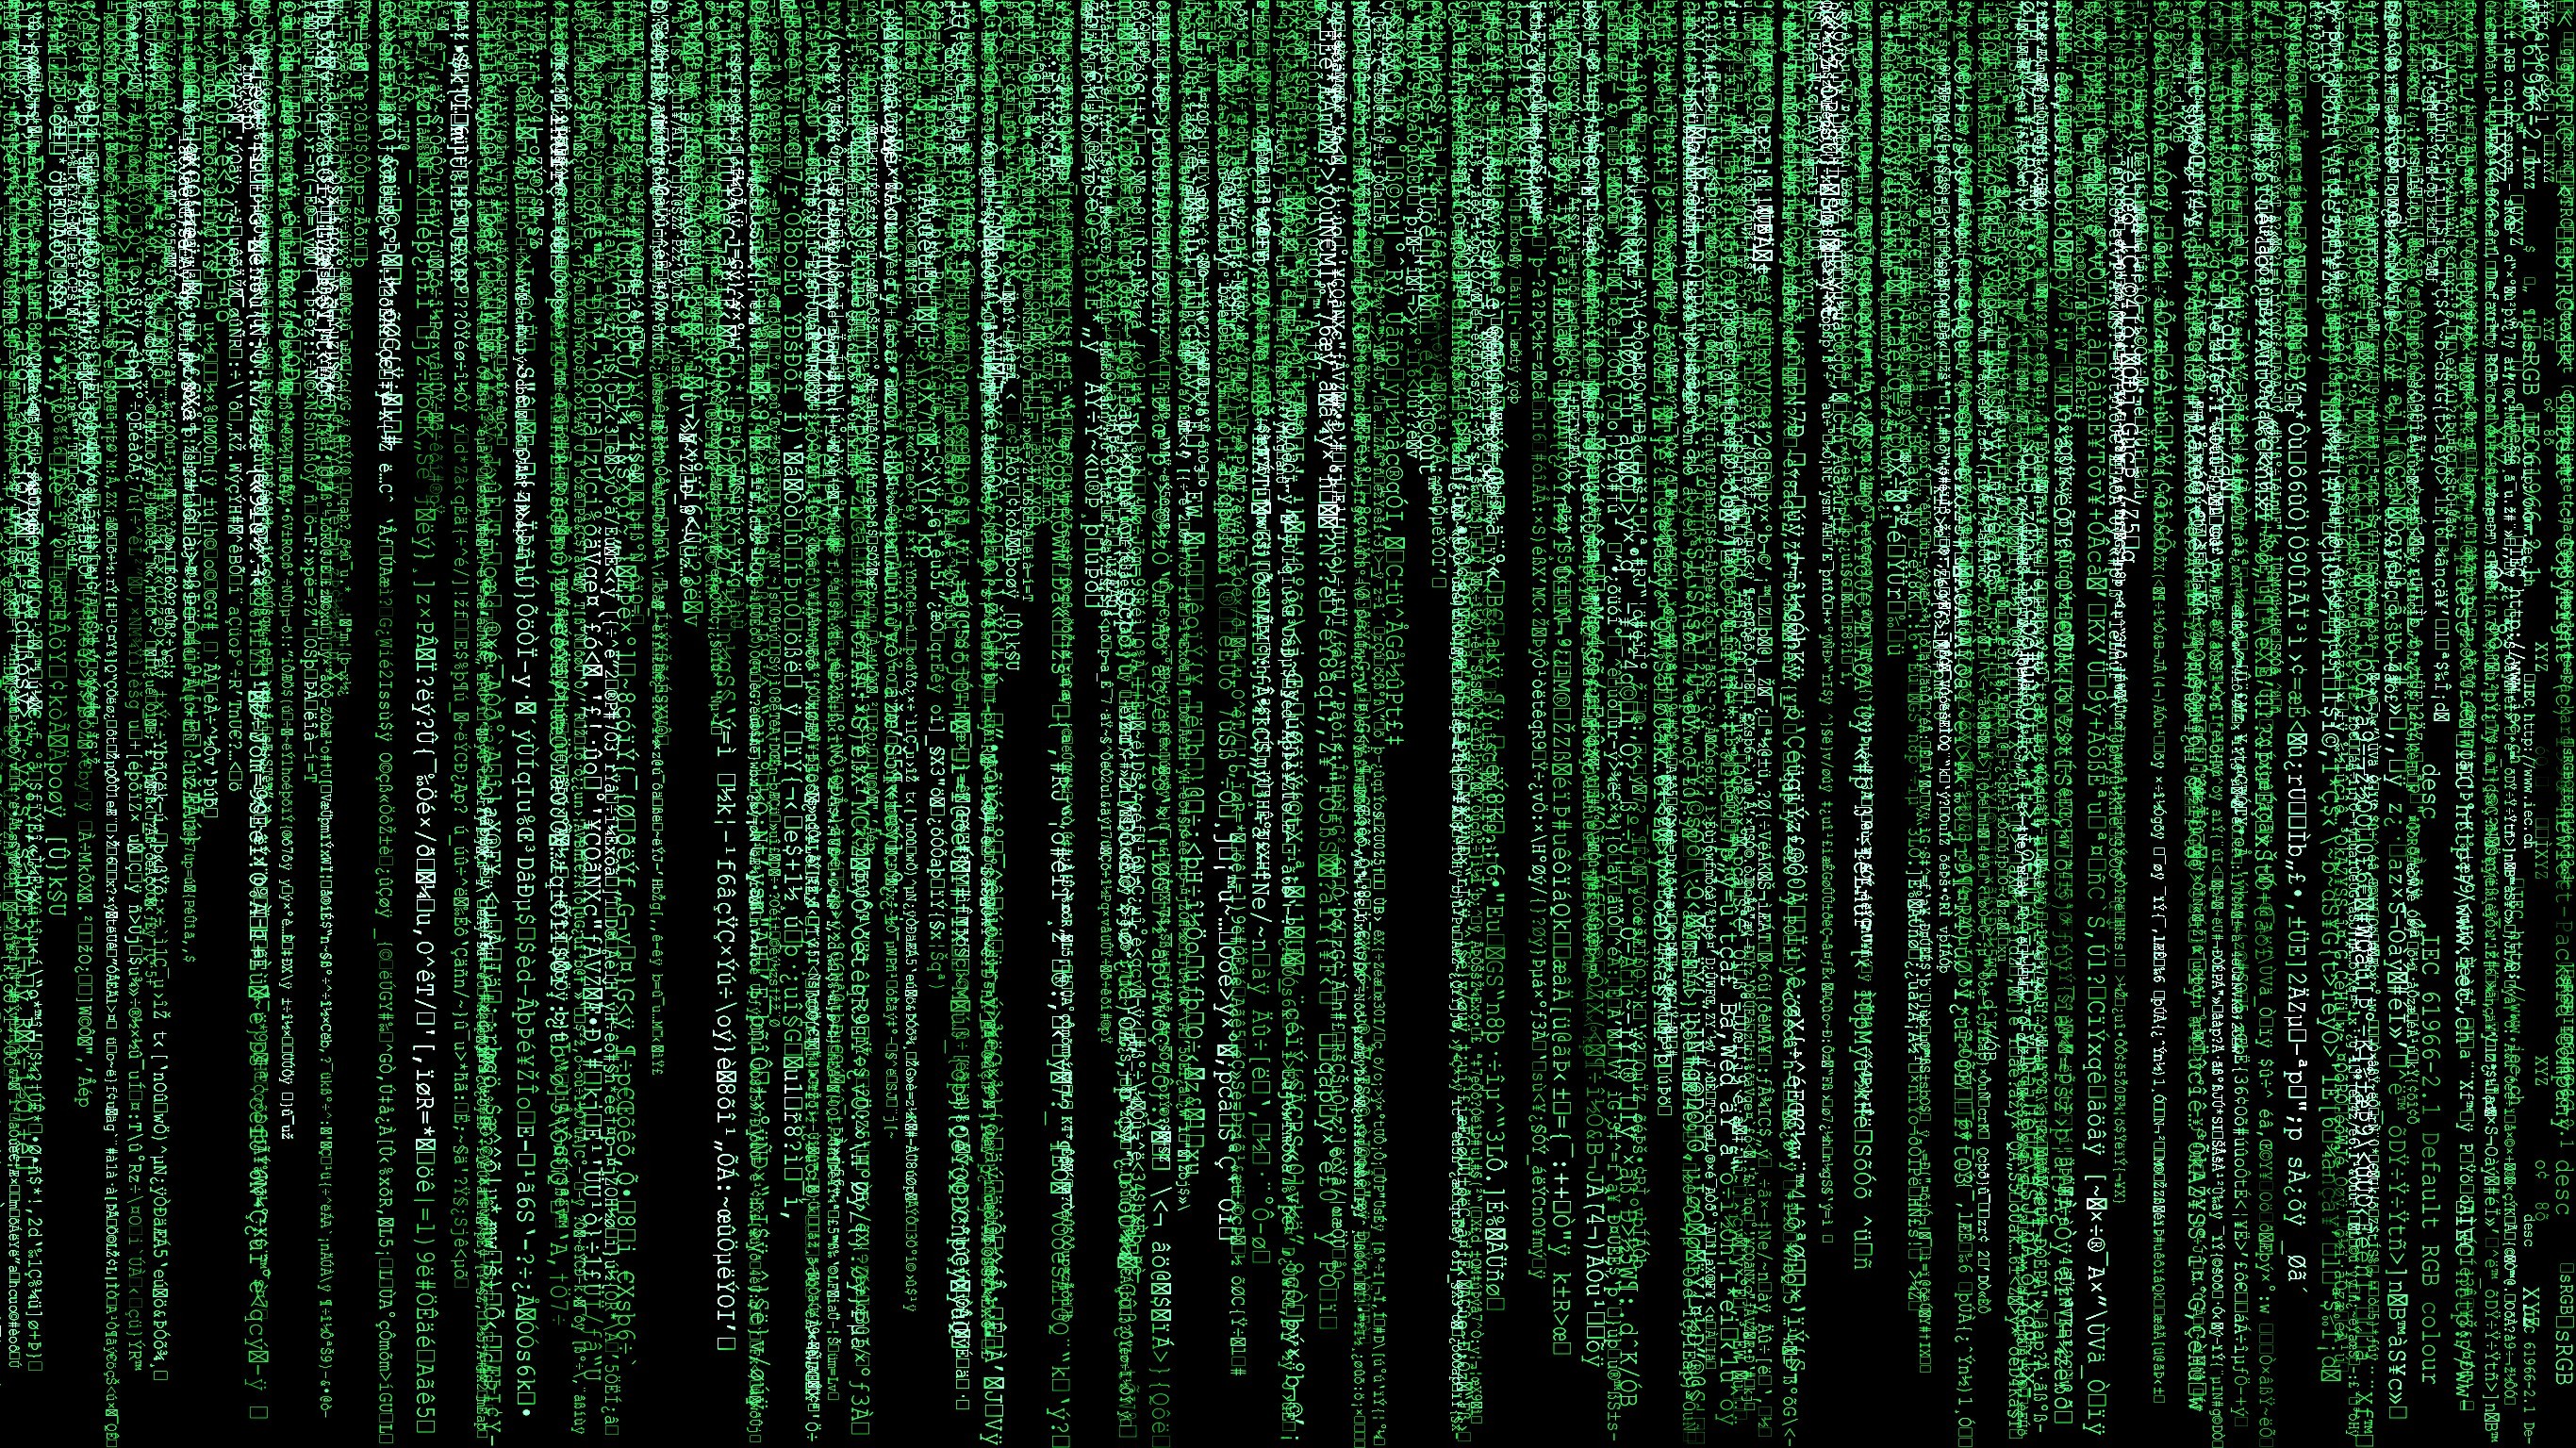 Free Download Matrix Wallpapers Hd Full Hd Pictures 2732x1536 For Your Desktop Mobile Tablet Explore 76 Matrix Wallpaper Matrix Live Wallpaper Pc Matrix Wallpaper For Windows 10 Hd Matrix Wallpaper